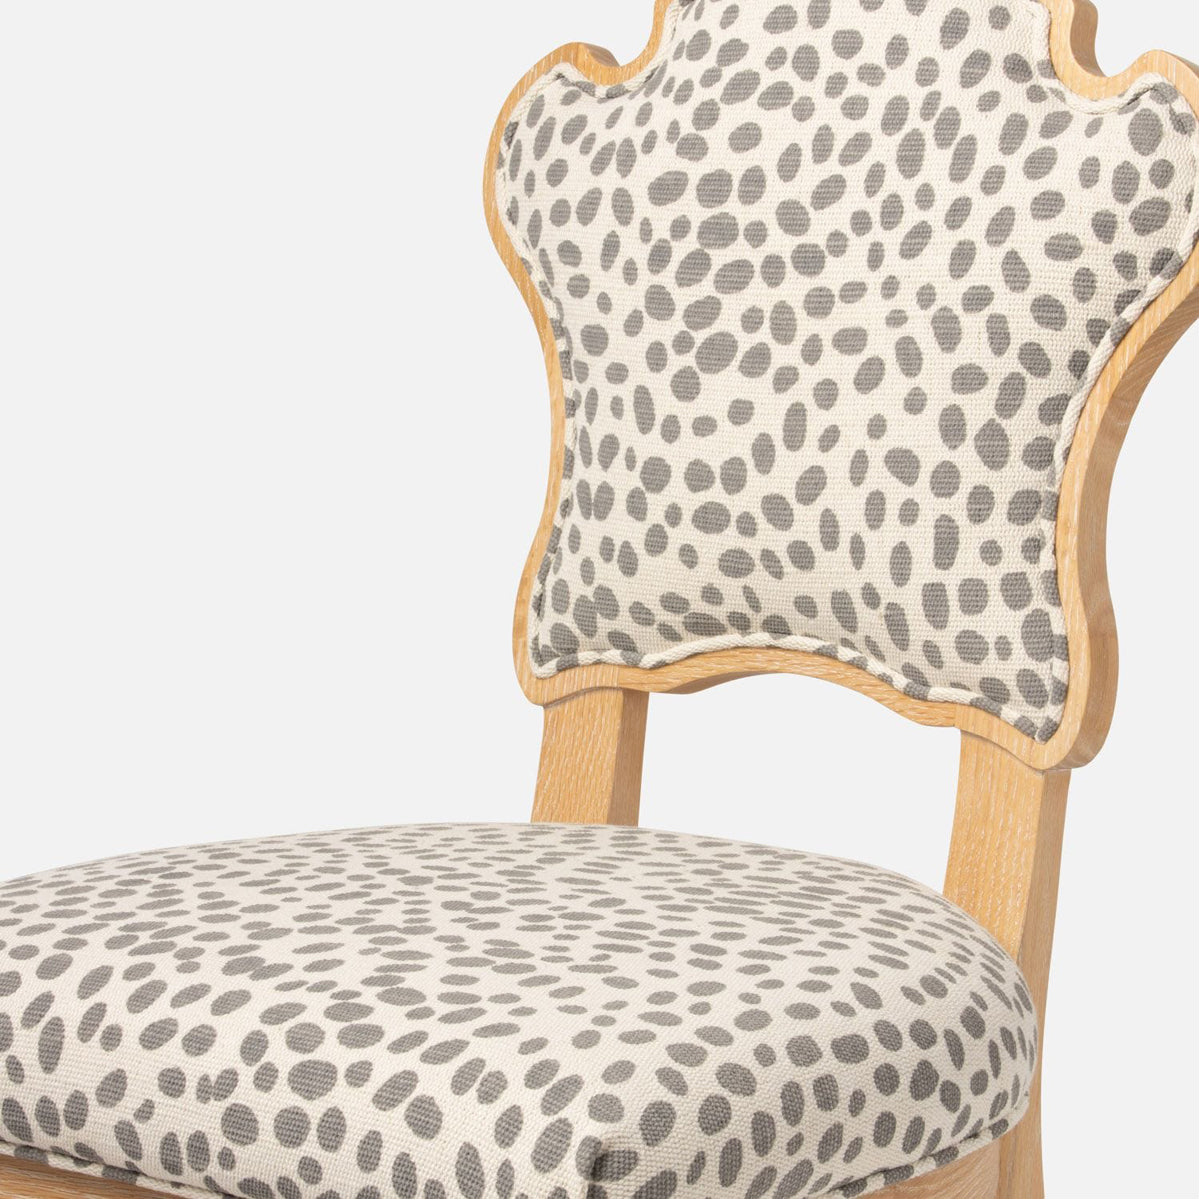 Made Goods Madisen Ornate Back Dining Chair in Humboldt Cotton Jute